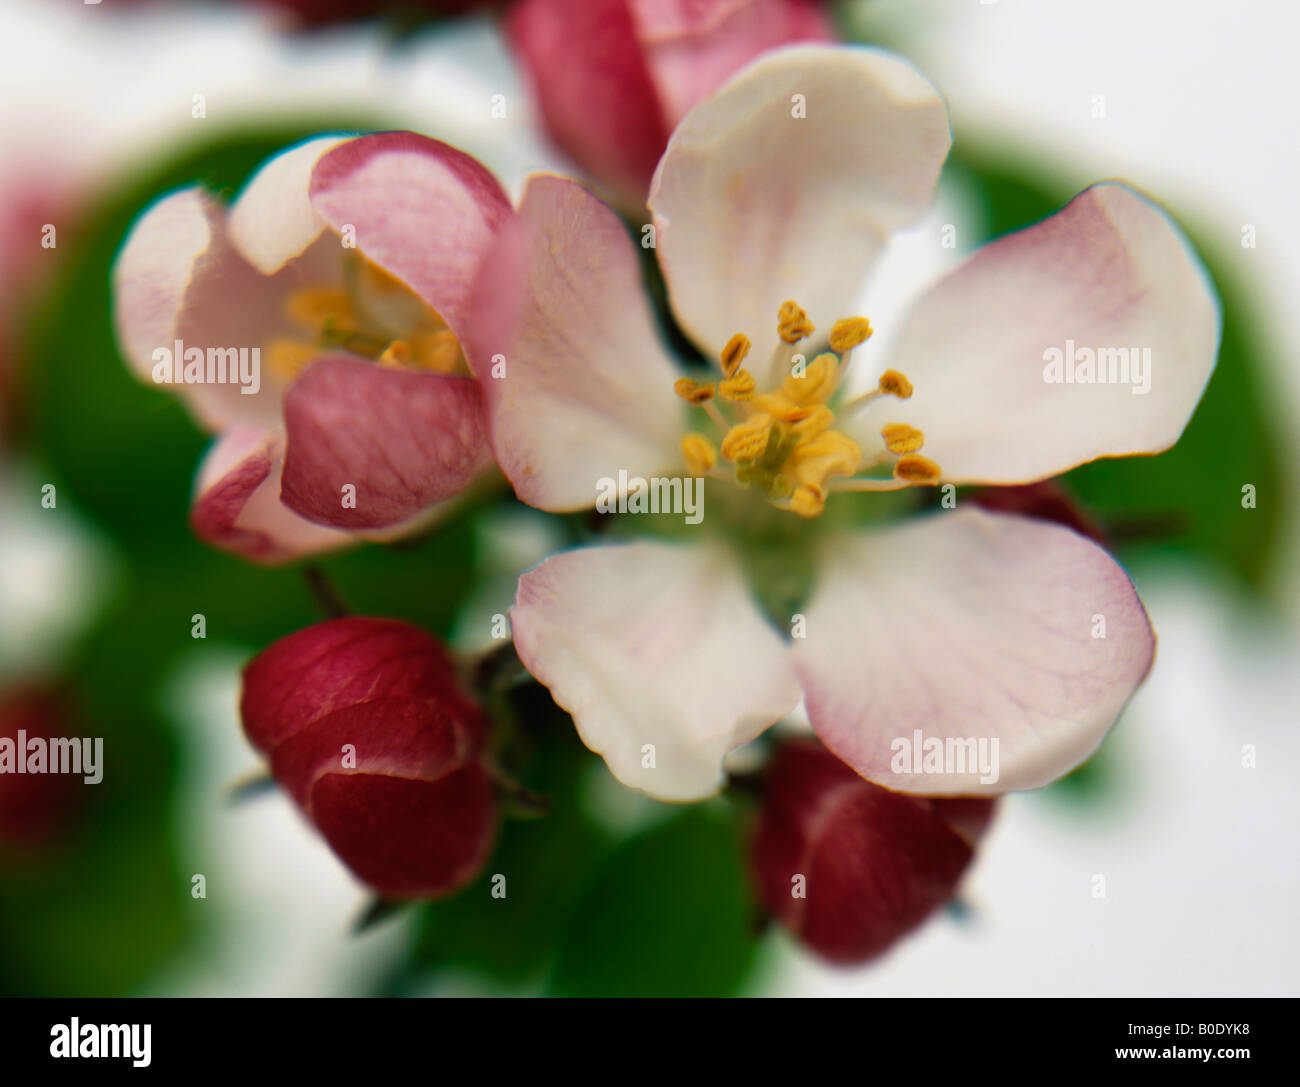 Detail of apple blossom Stock Photo